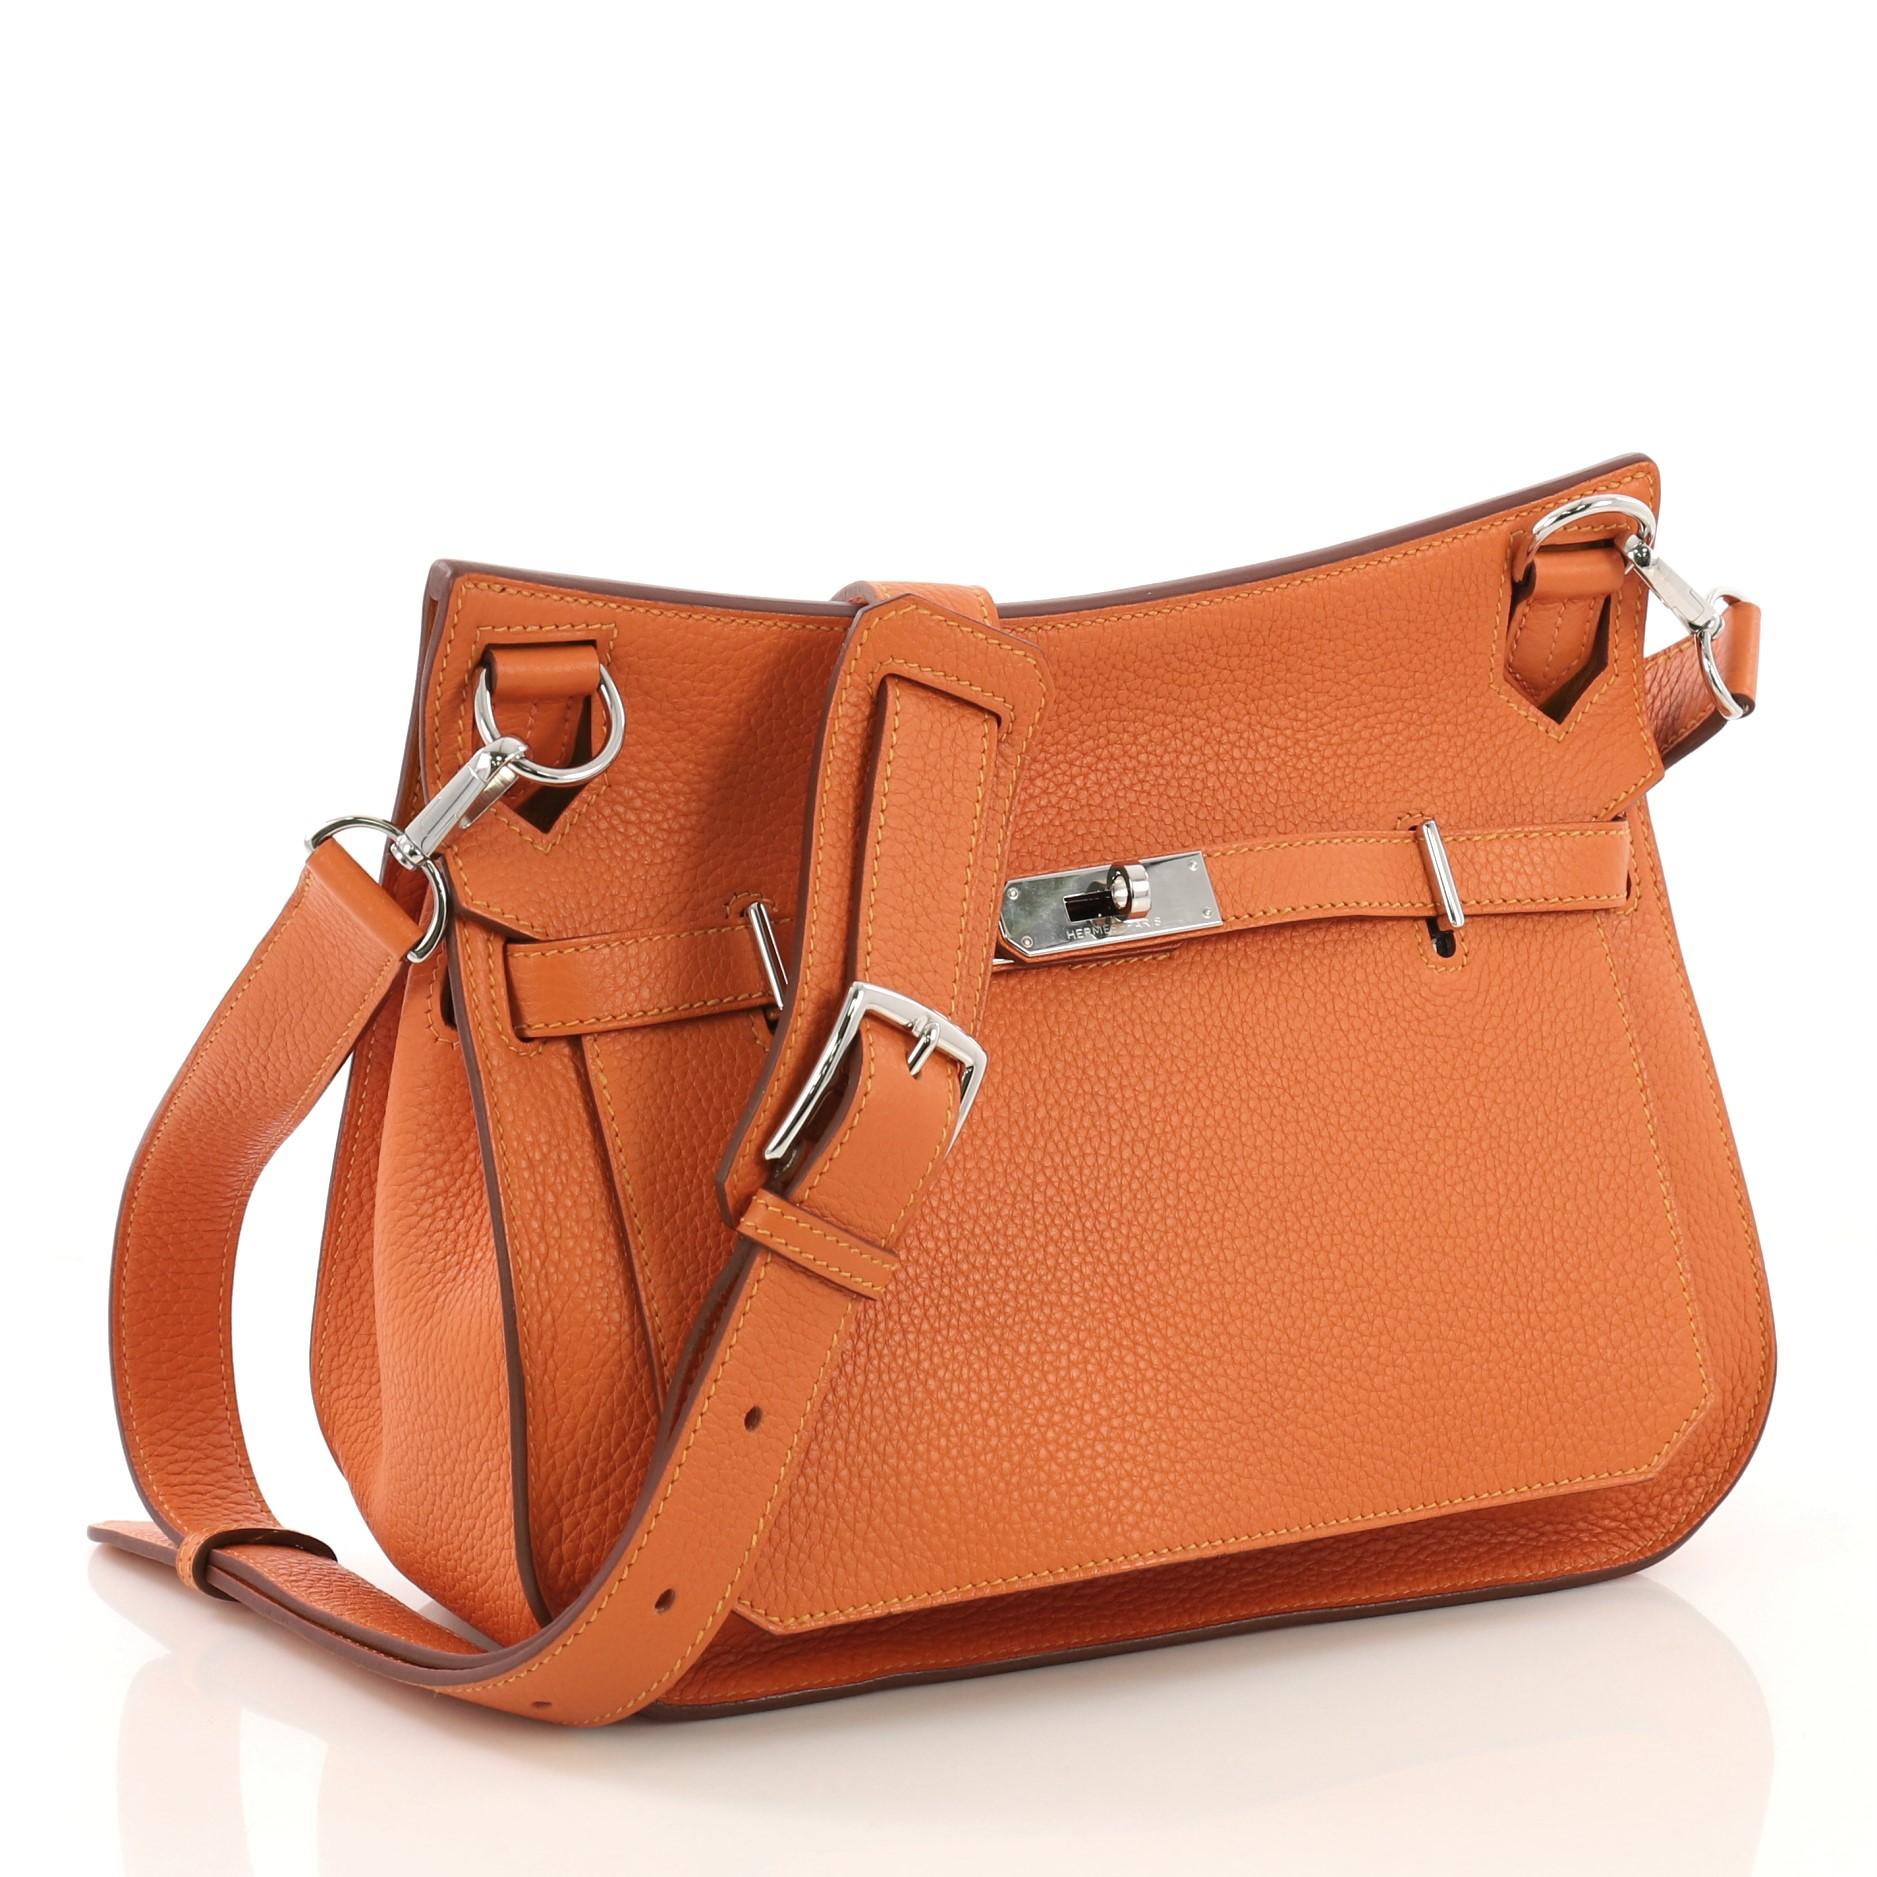 This Hermes Eclat Jypsiere Handbag Clemence 28, crafted in Orange H orange Clemence leather, features long adjustable strap and palladium hardware. Its turn-lock closure opens to a Moutarde Chevre leather interior with slip and zip pockets. Date